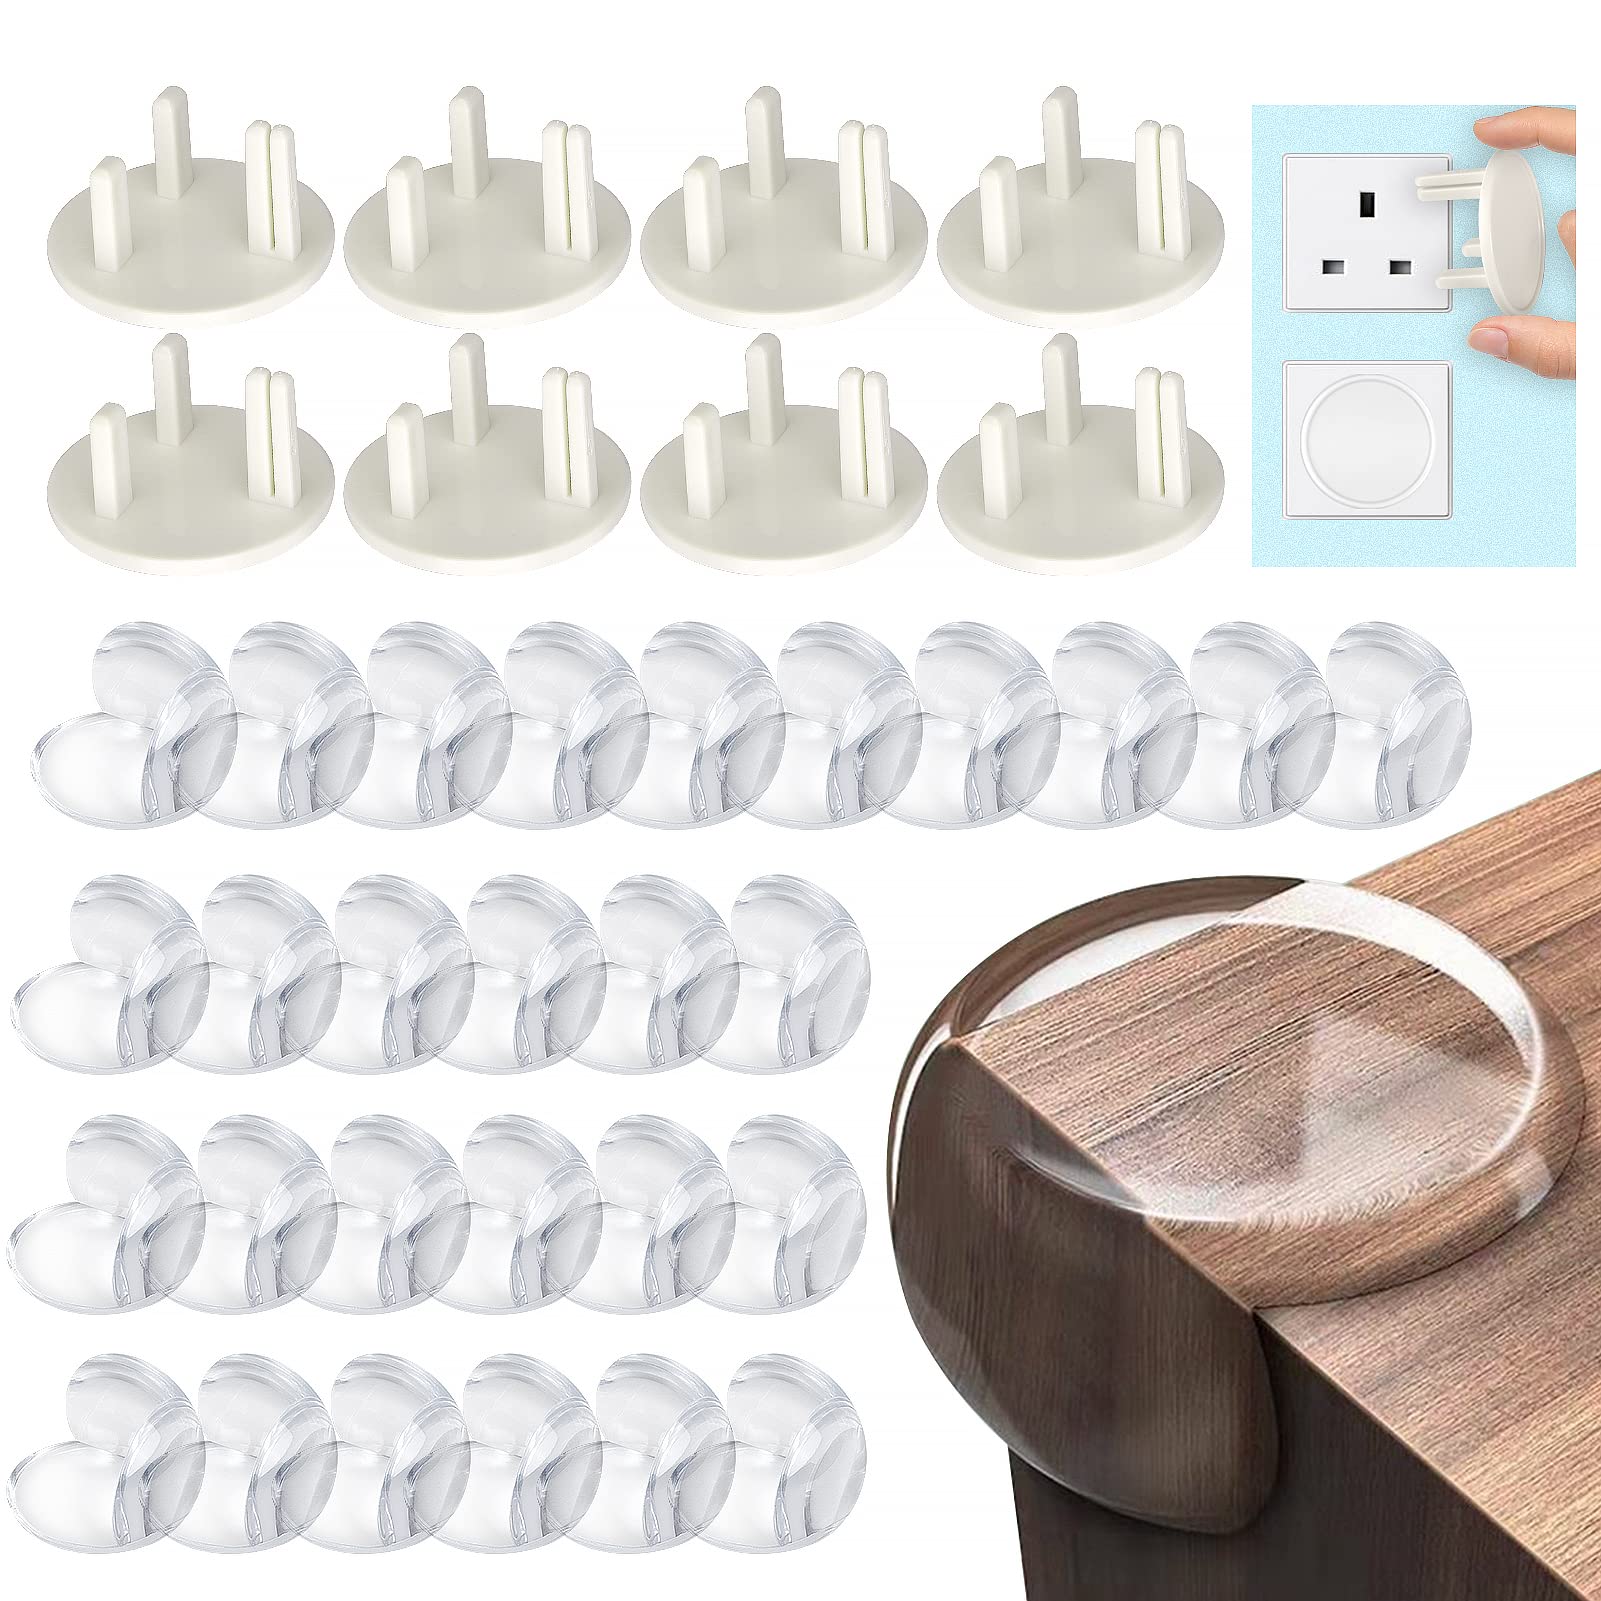 36 Pcs Corner Protectors & Child Proof Plug Socket Covers Corner Guards Baby Proofing Corners Against Sharp Corner Clear Table Corner Protectors for kids with Strong Adhesive Tape